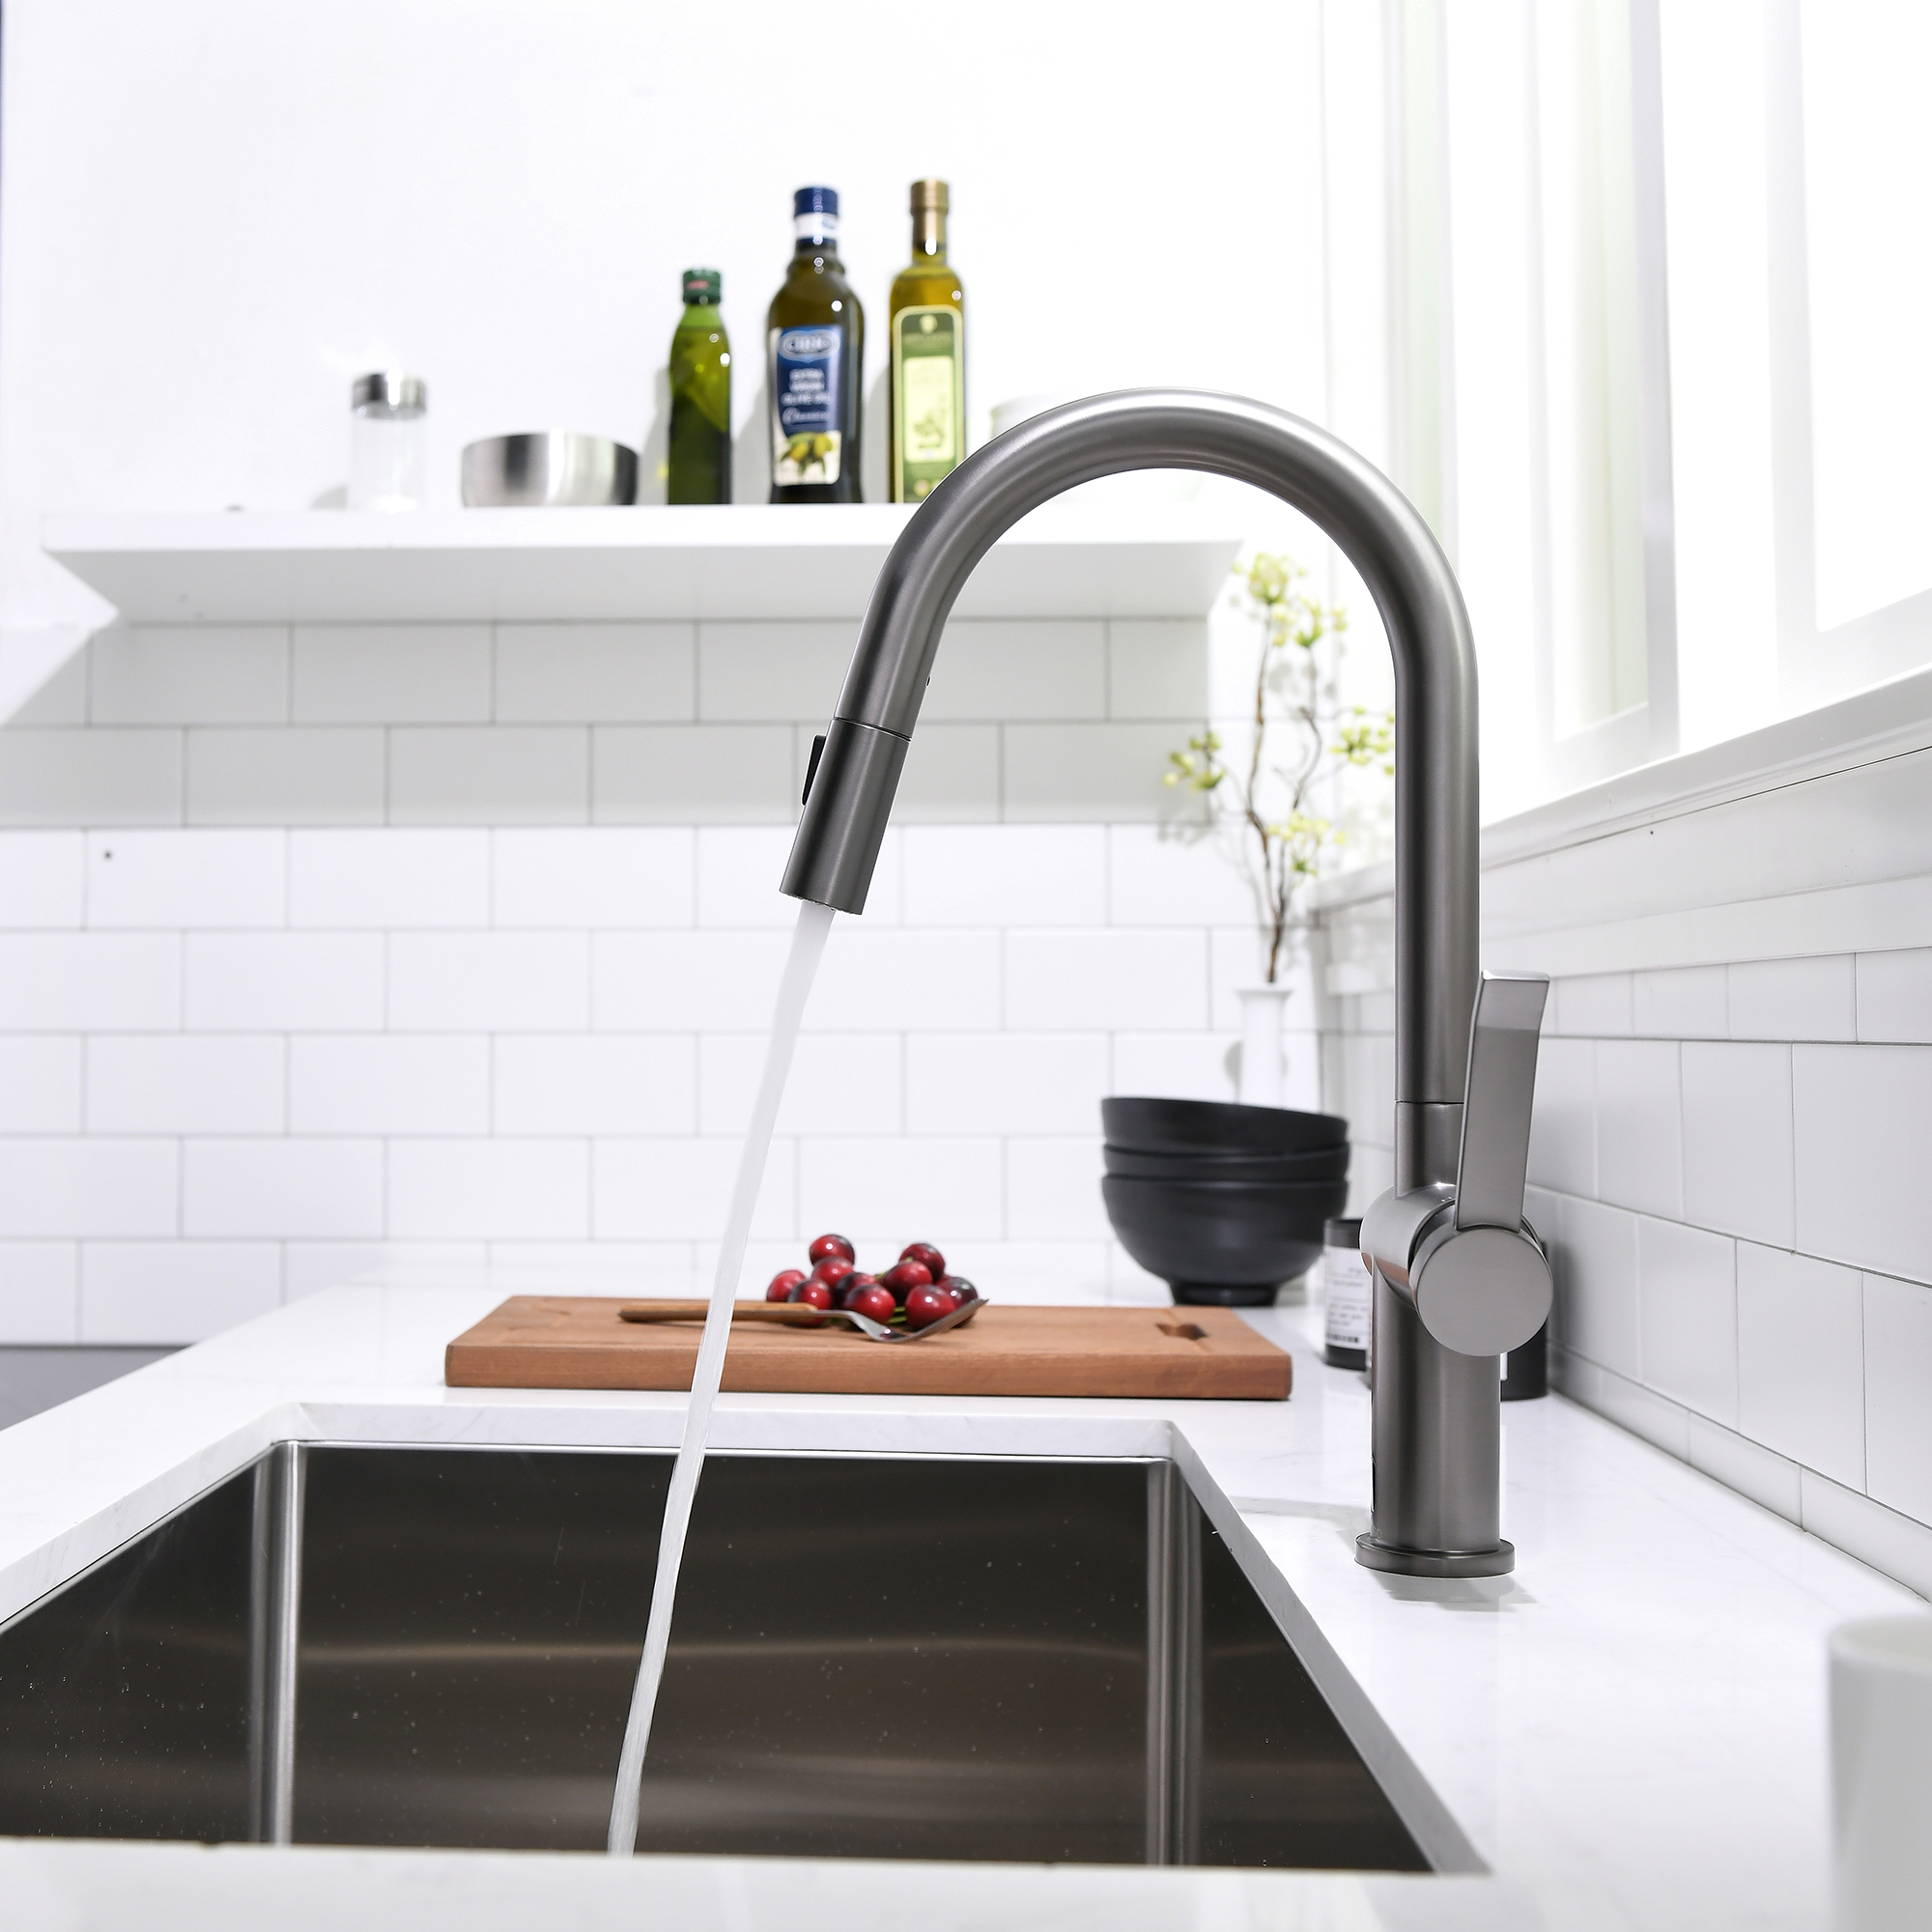 Chrome Kitchen Faucet Best Kitchen Faucet with Pull Down Sprayer